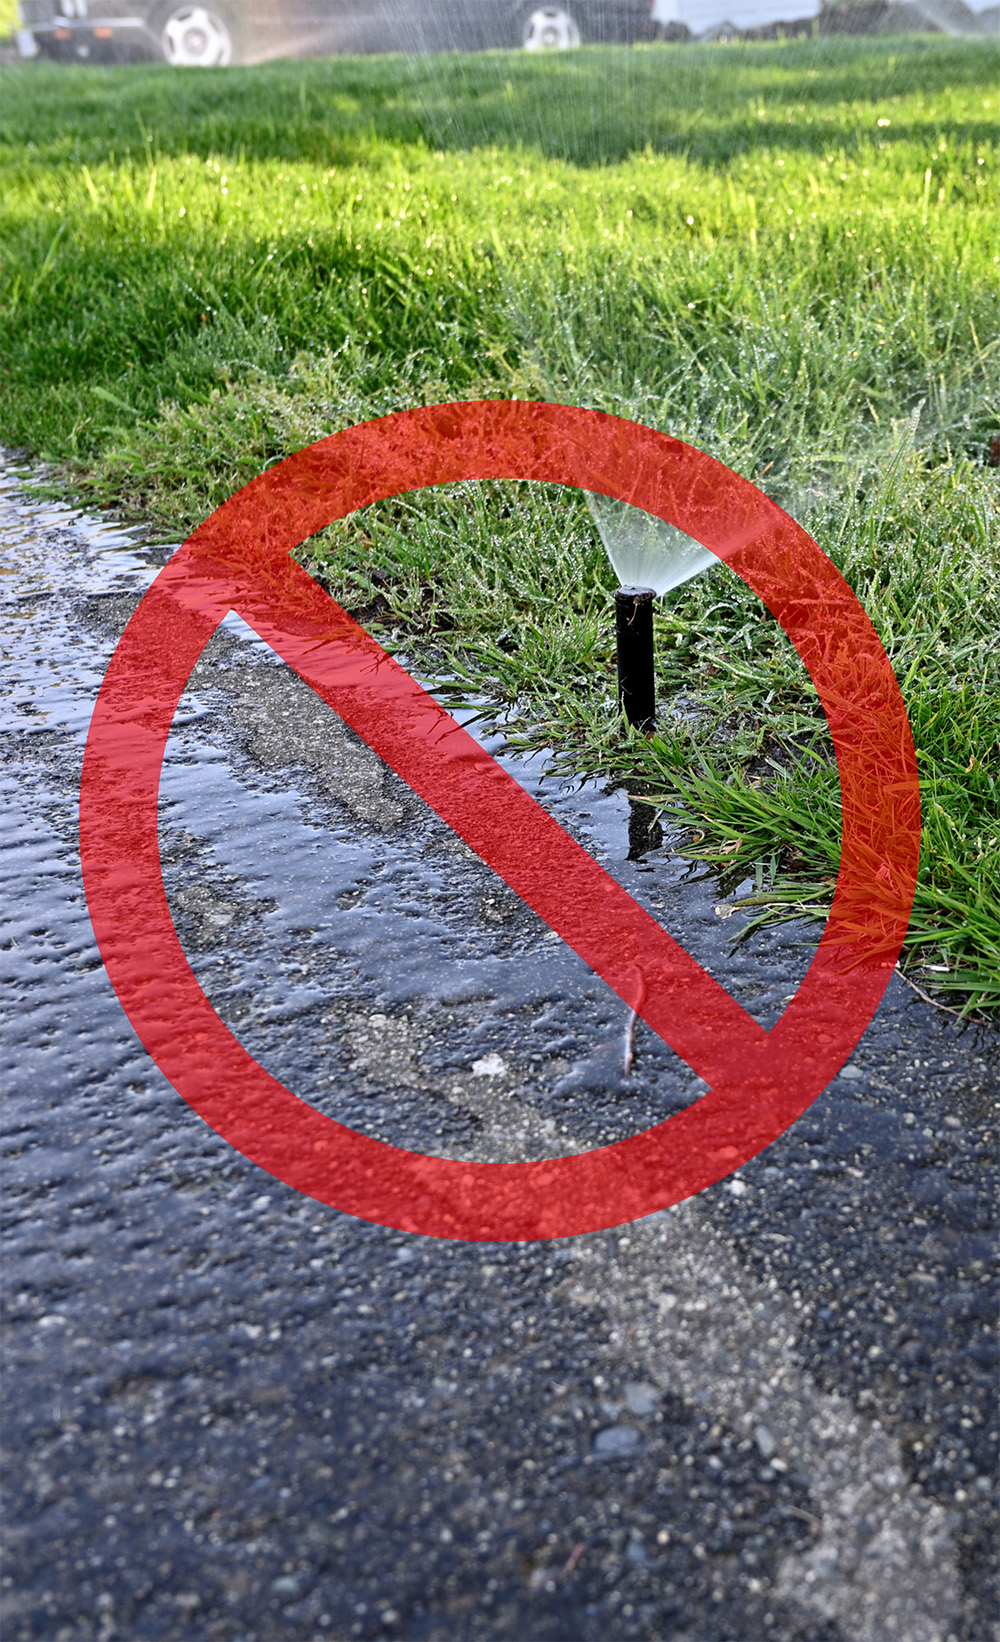 Prohibited graphic on top of photo of sprinkler watering grass and water running on sidewalk